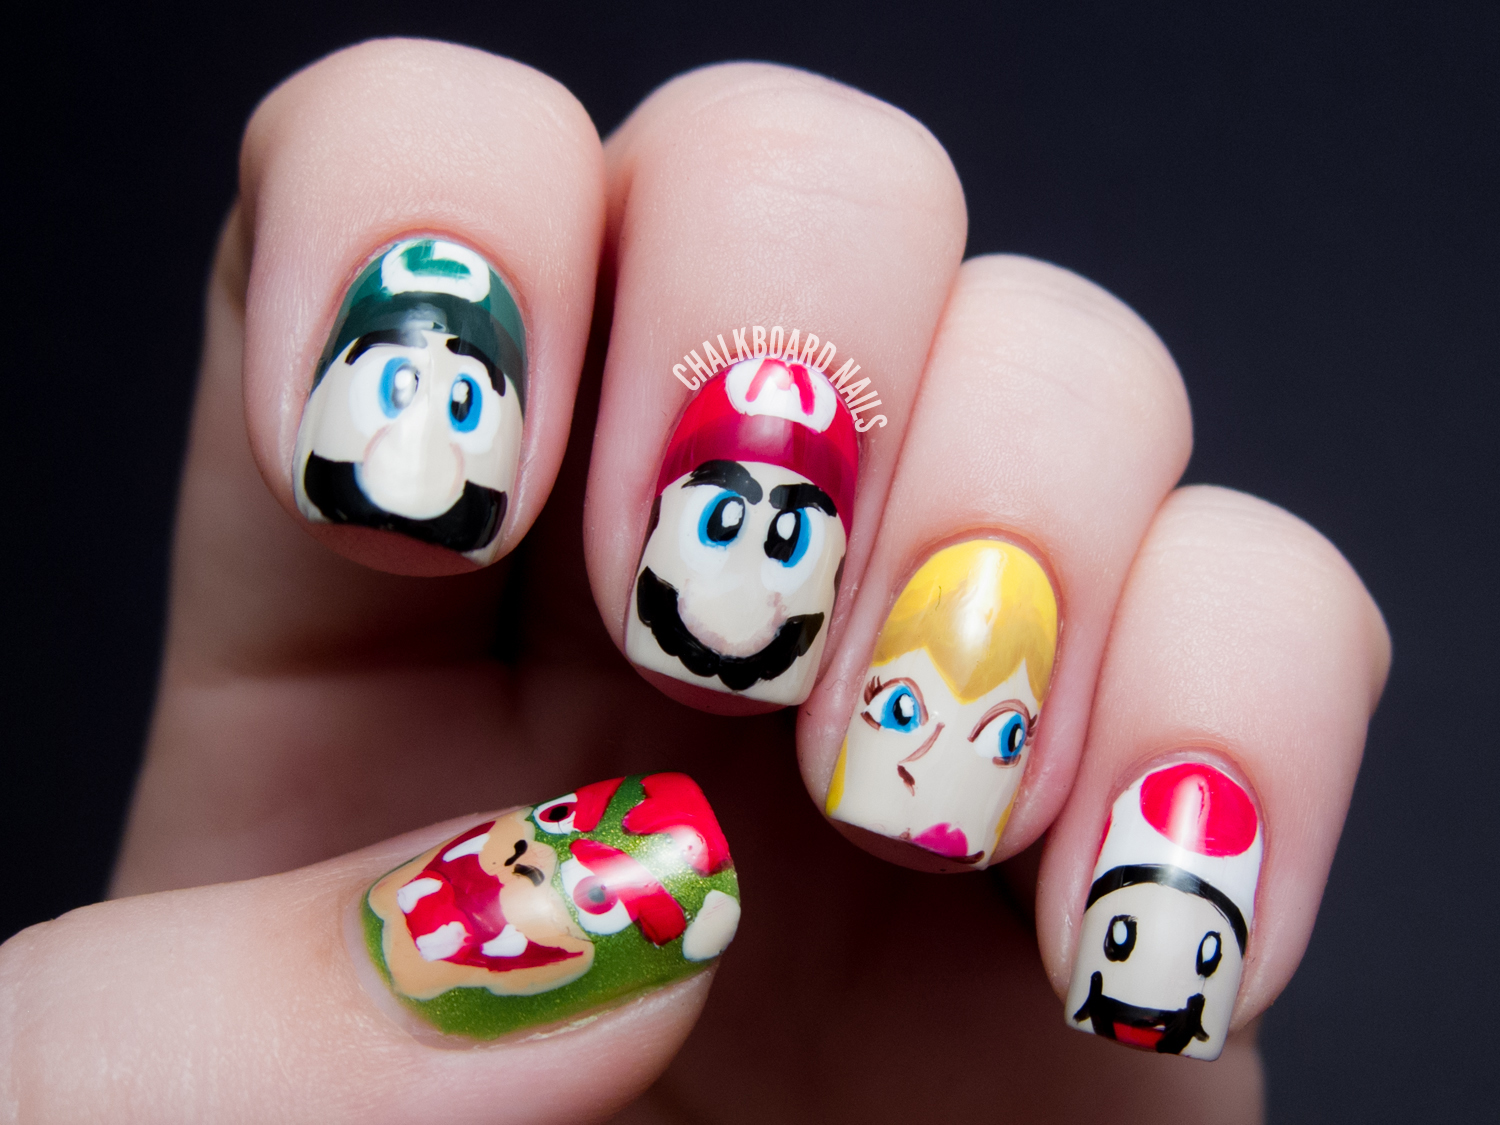 7. Cartoon and Character Nail Designs for Girls - wide 6